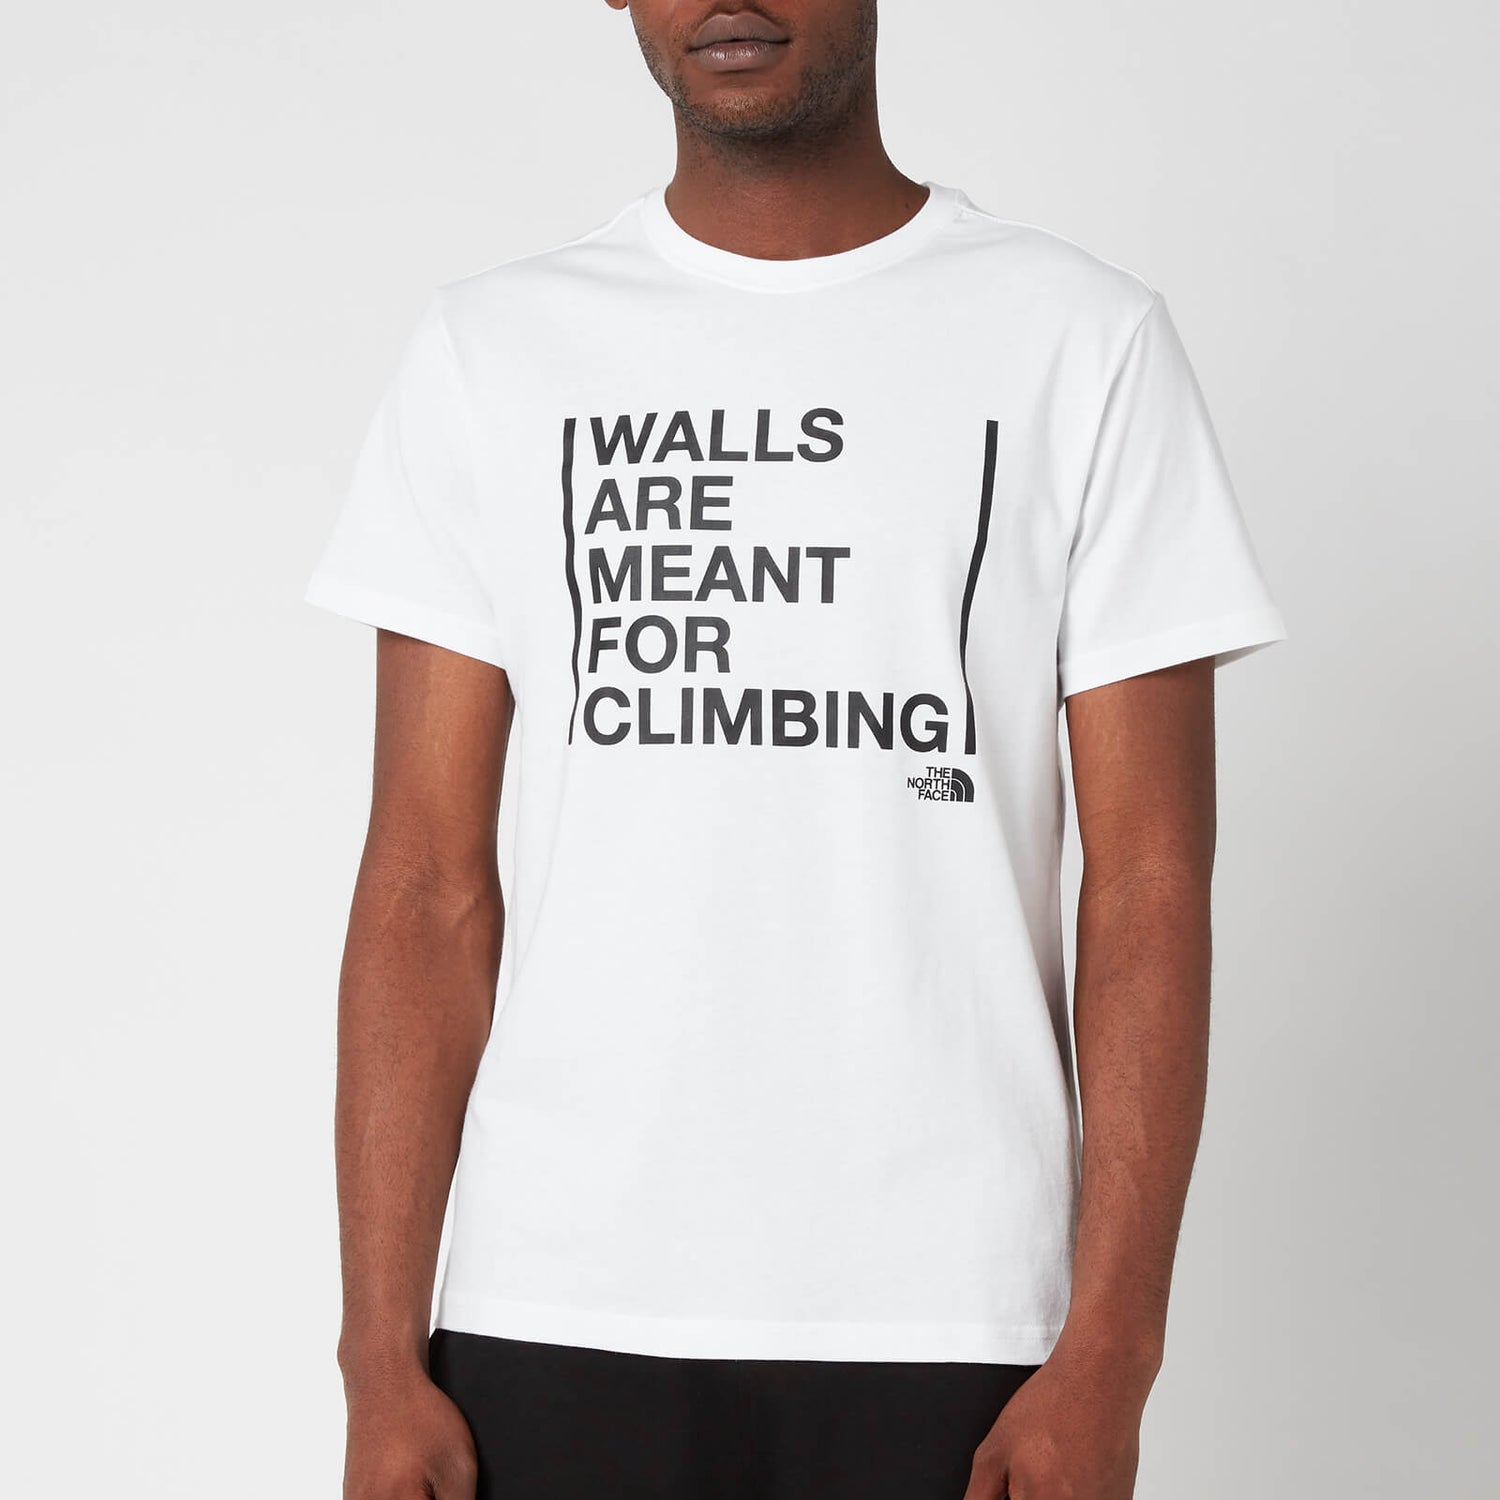 The North Face Men's "Walls Are Meant For Climbing" Short Sleeve T-Shirt - TNF White